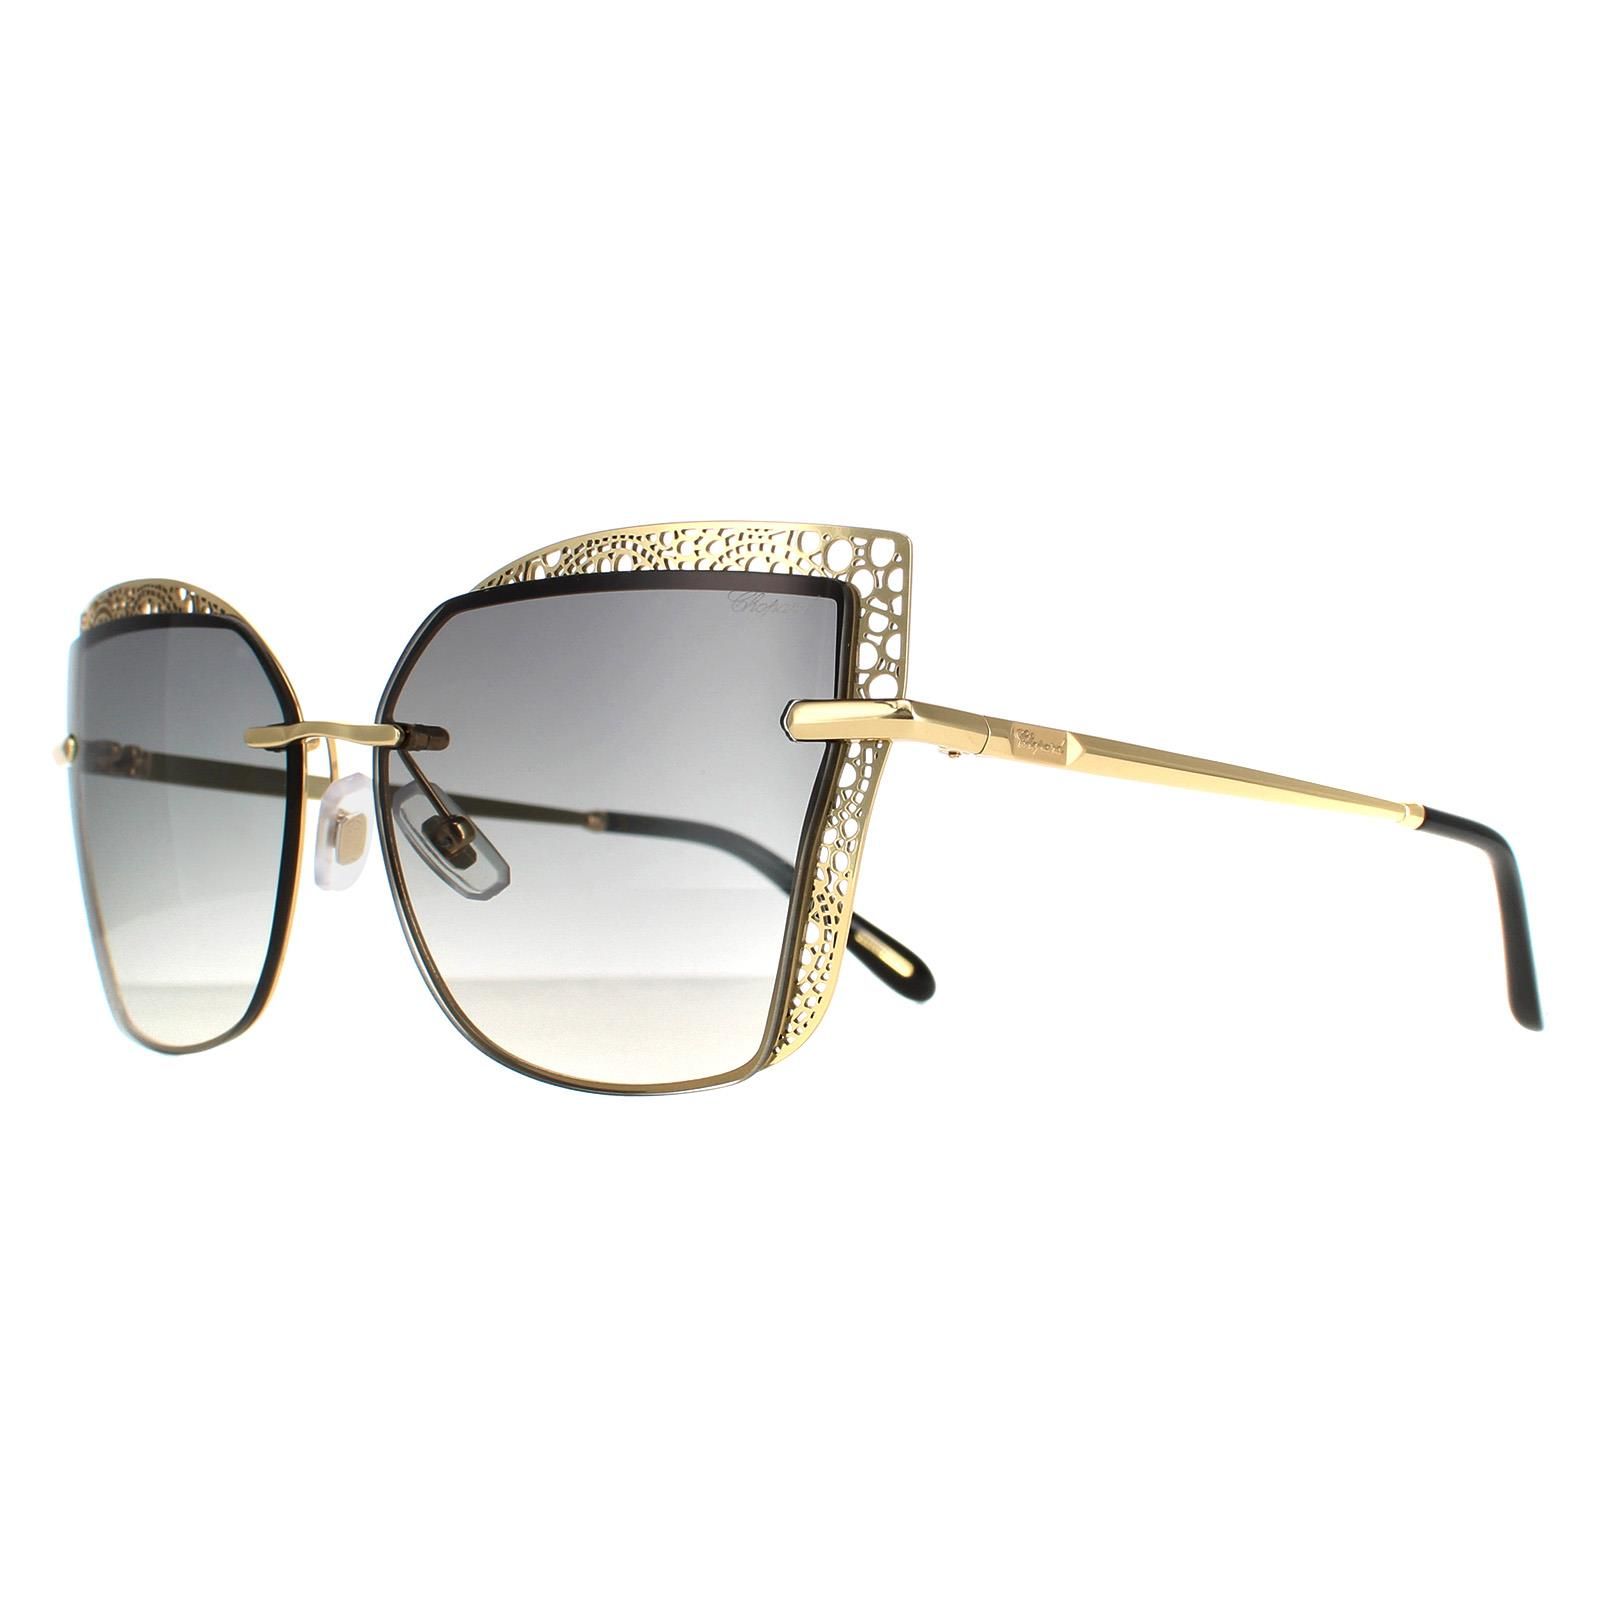 Chopard Butterfly Womens Shiny Rose Gold Smoke Gradient SCHC84M  Chopard are a stunning butterfly design crafted from lightweight metal. Adjustable nose pads and plastic temple tips ensure all day comfort. Gorgeous slender metal temples are engraved with the Chopard branding for authenticity.